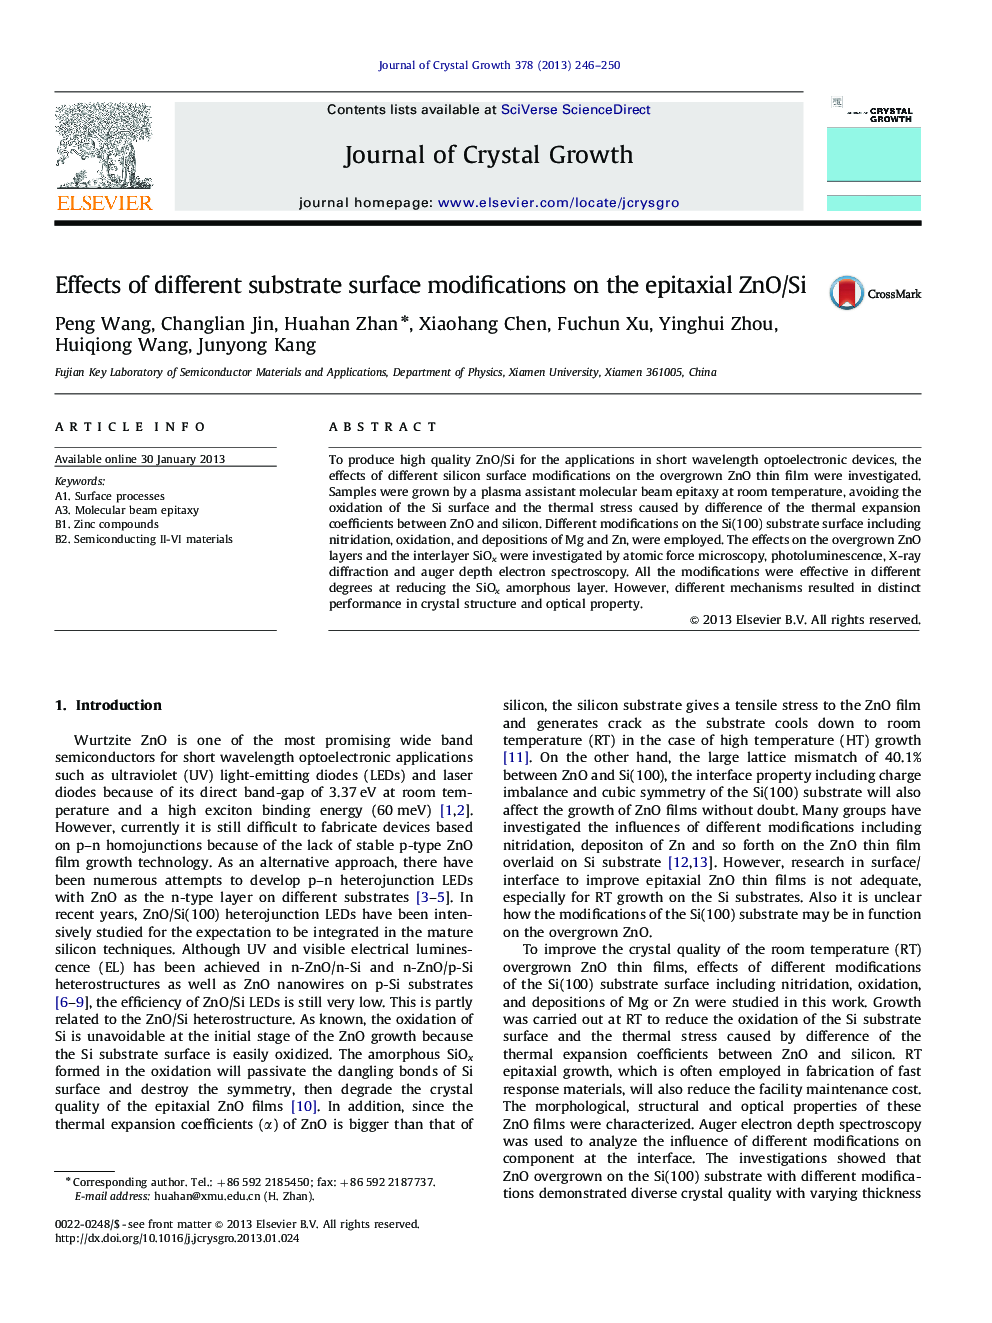 Effects of different substrate surface modifications on the epitaxial ZnO/Si